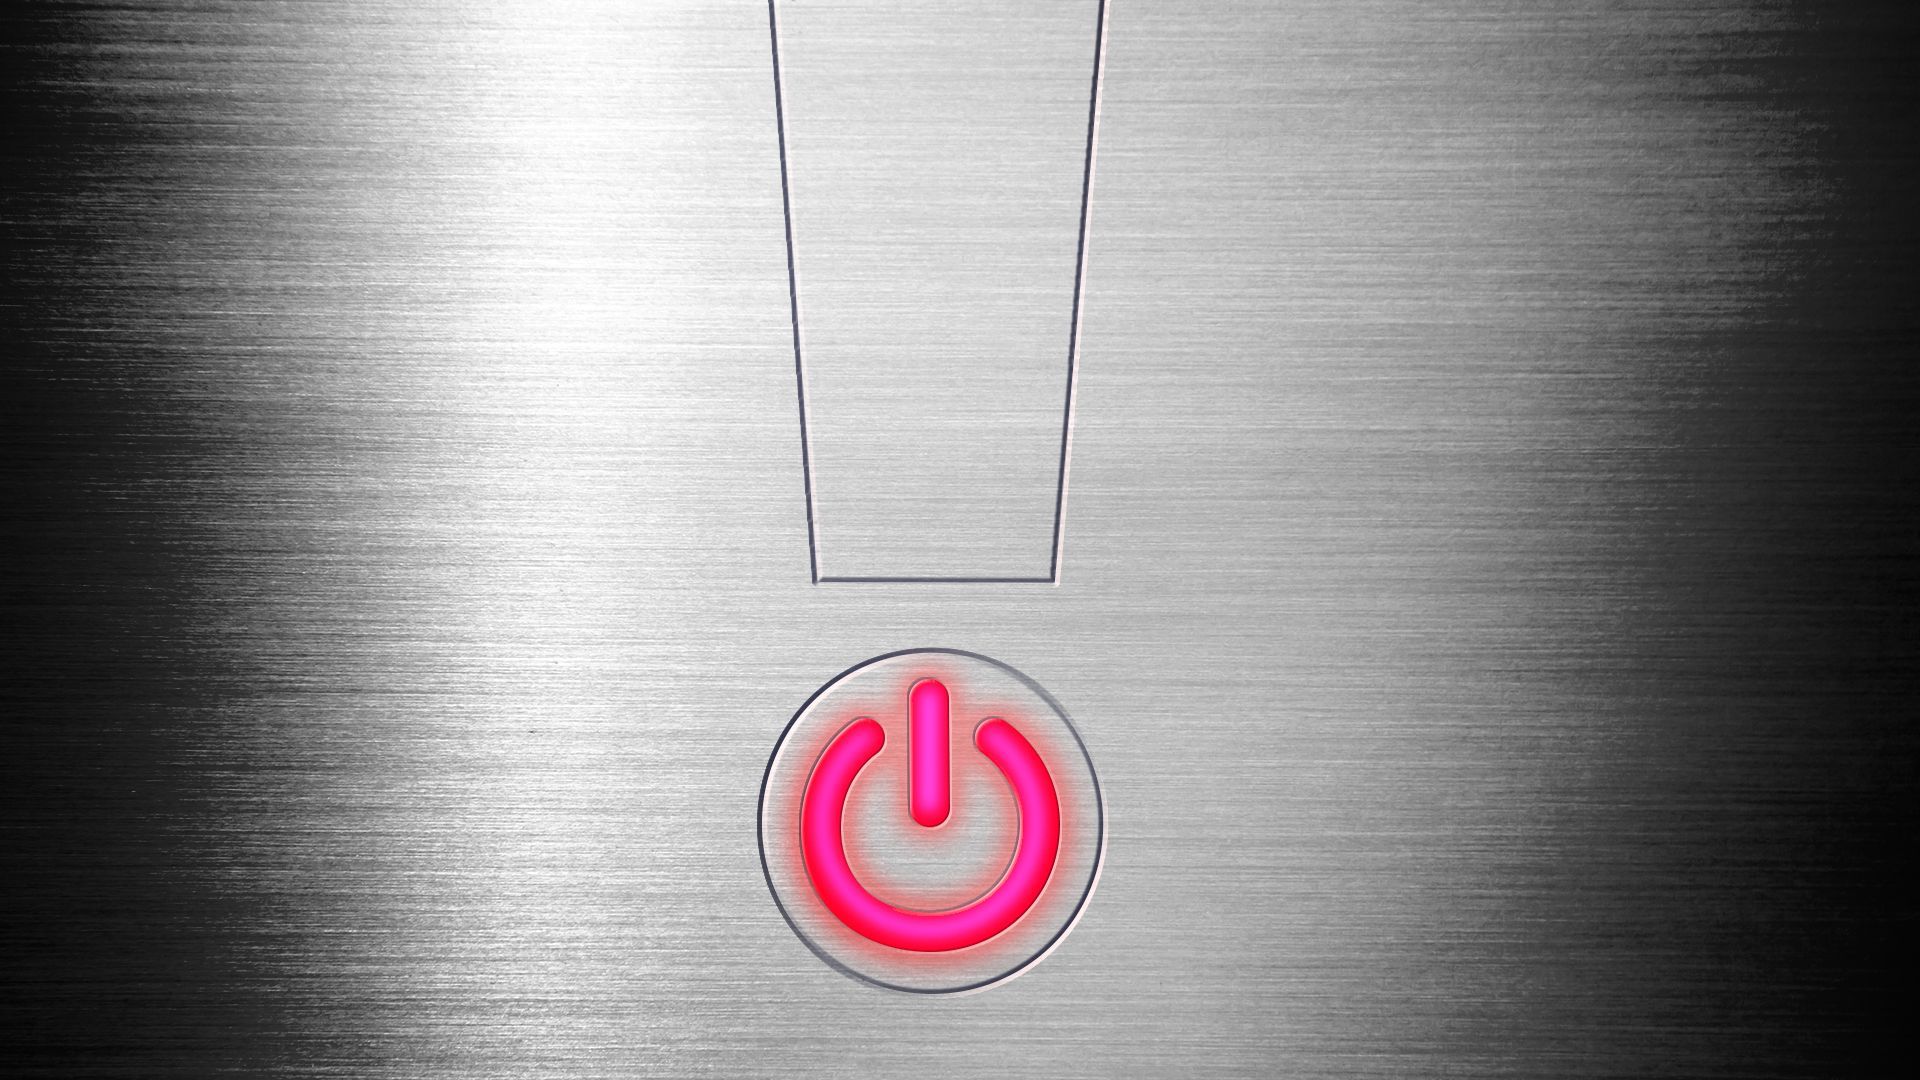 Illustration of an exclamation point with the dot resembling a power button.